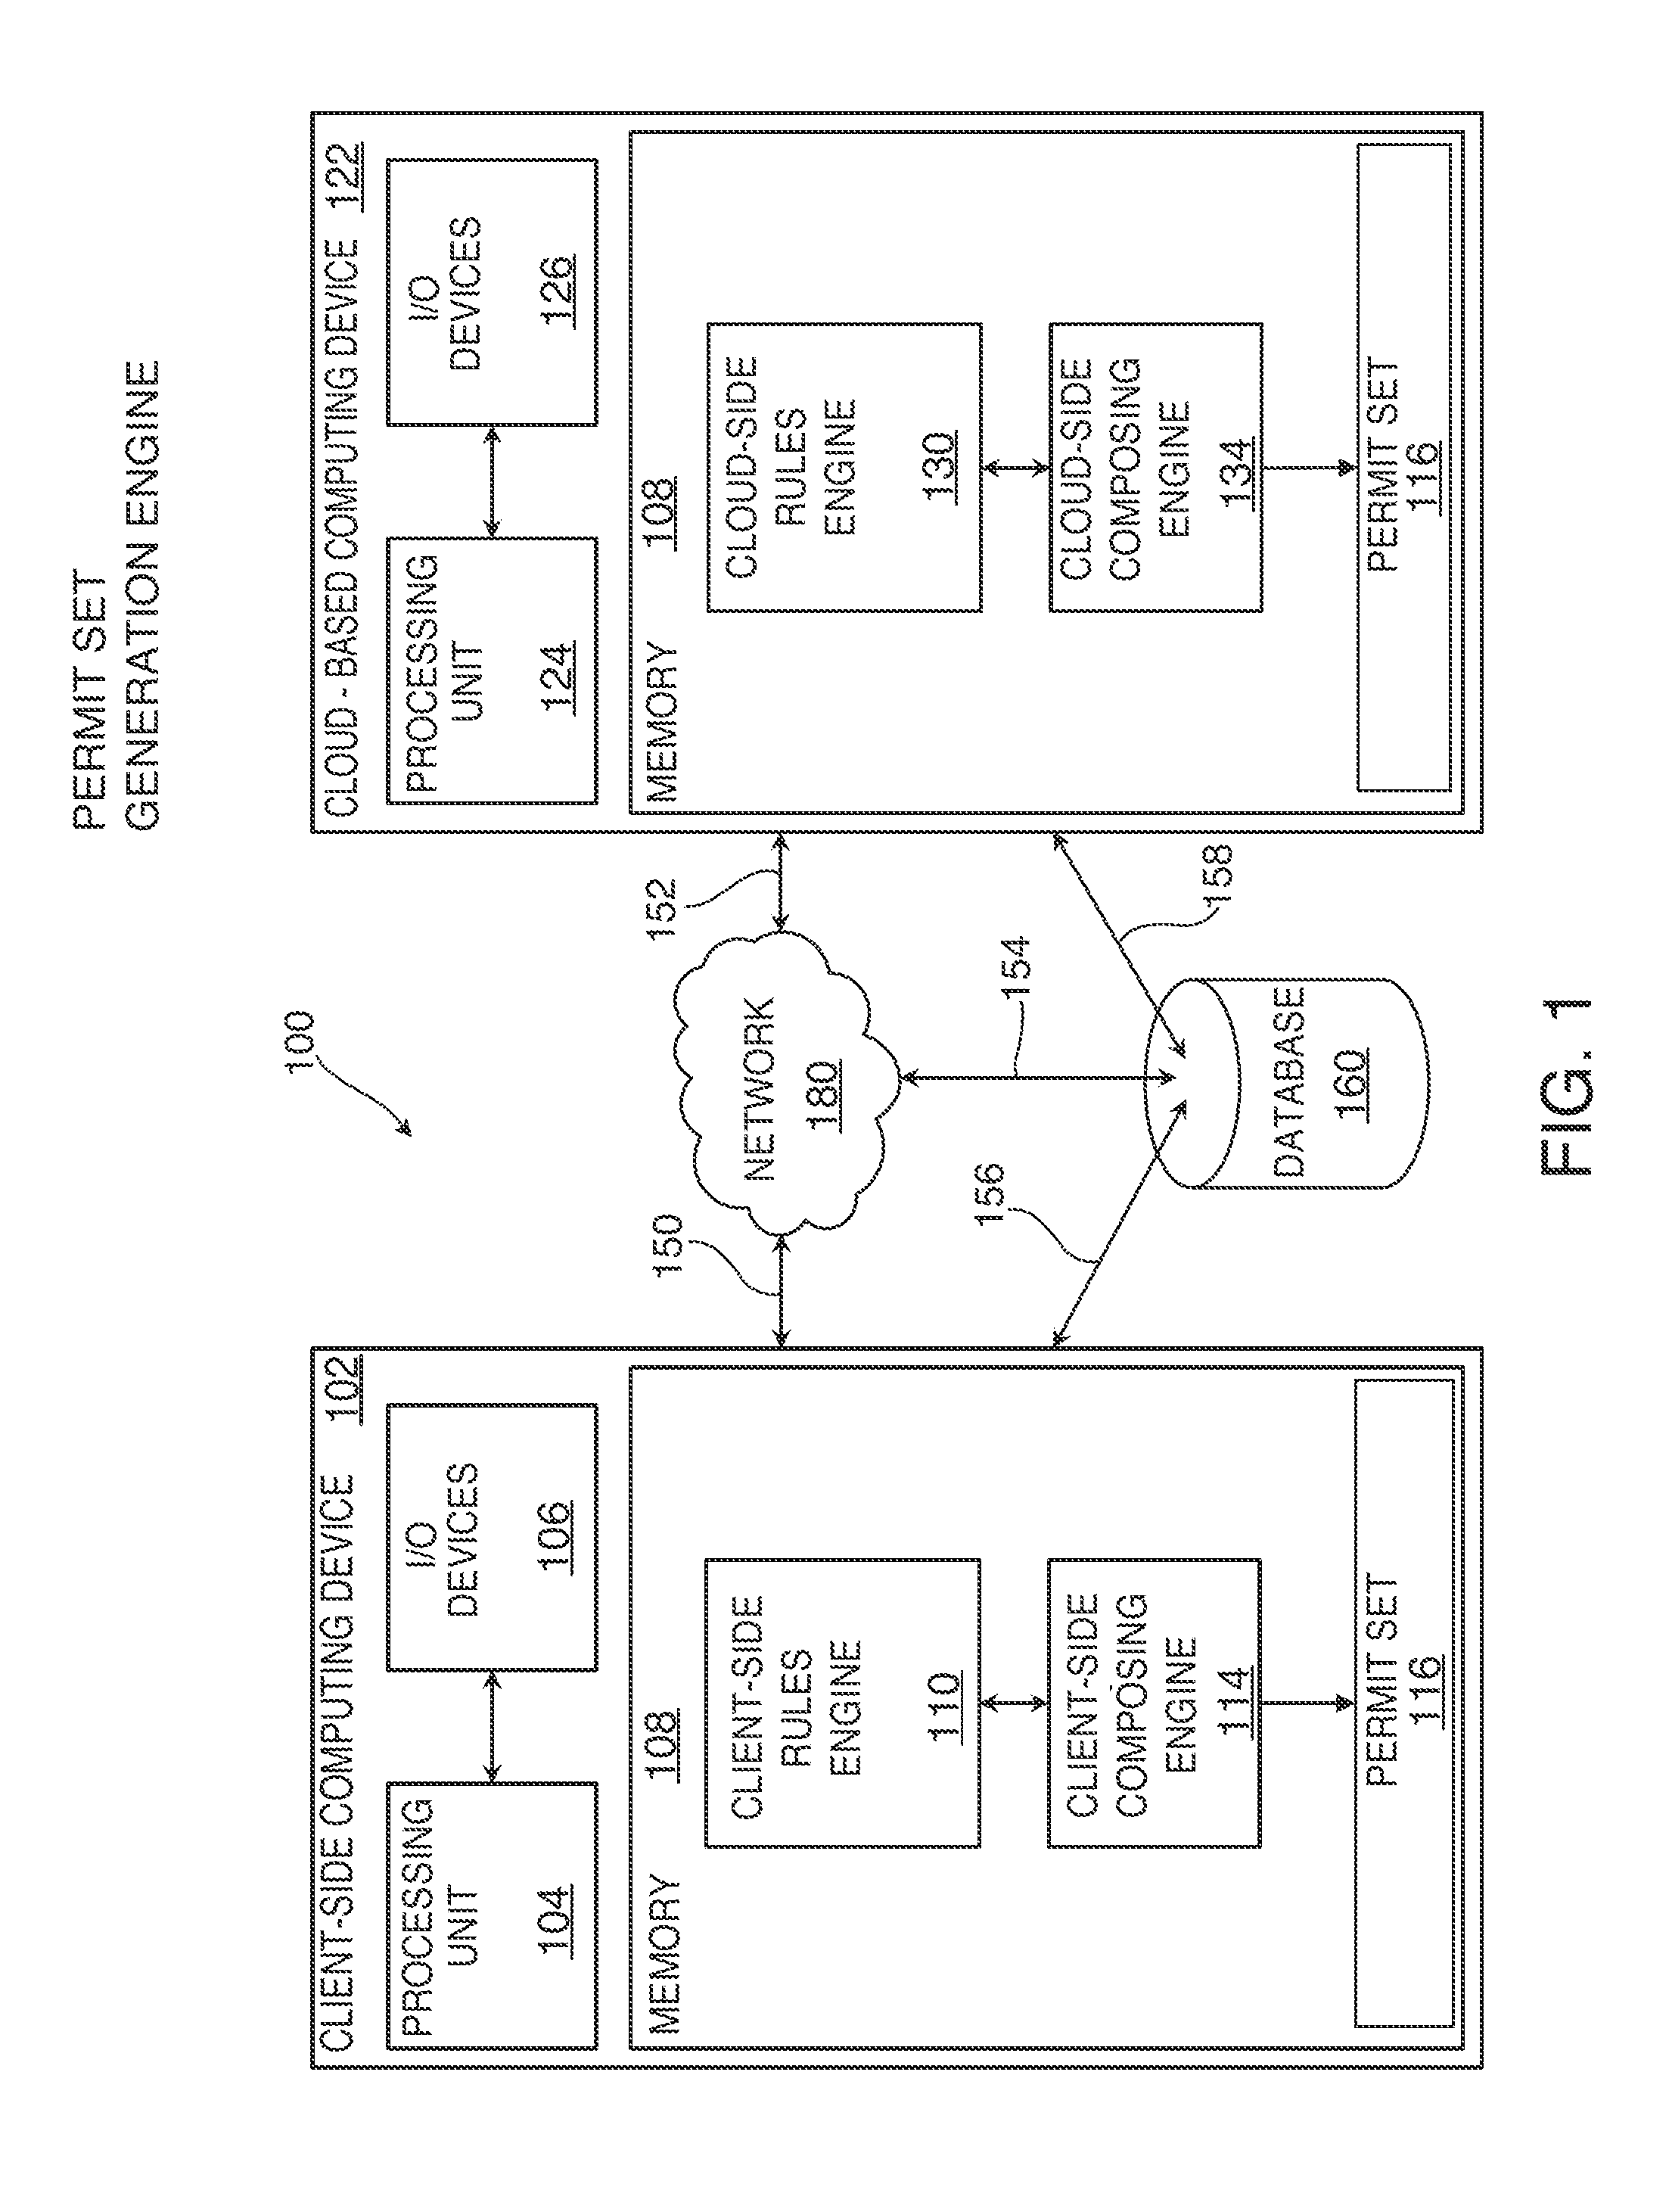 Systems and Methods for Generating Permit Sets